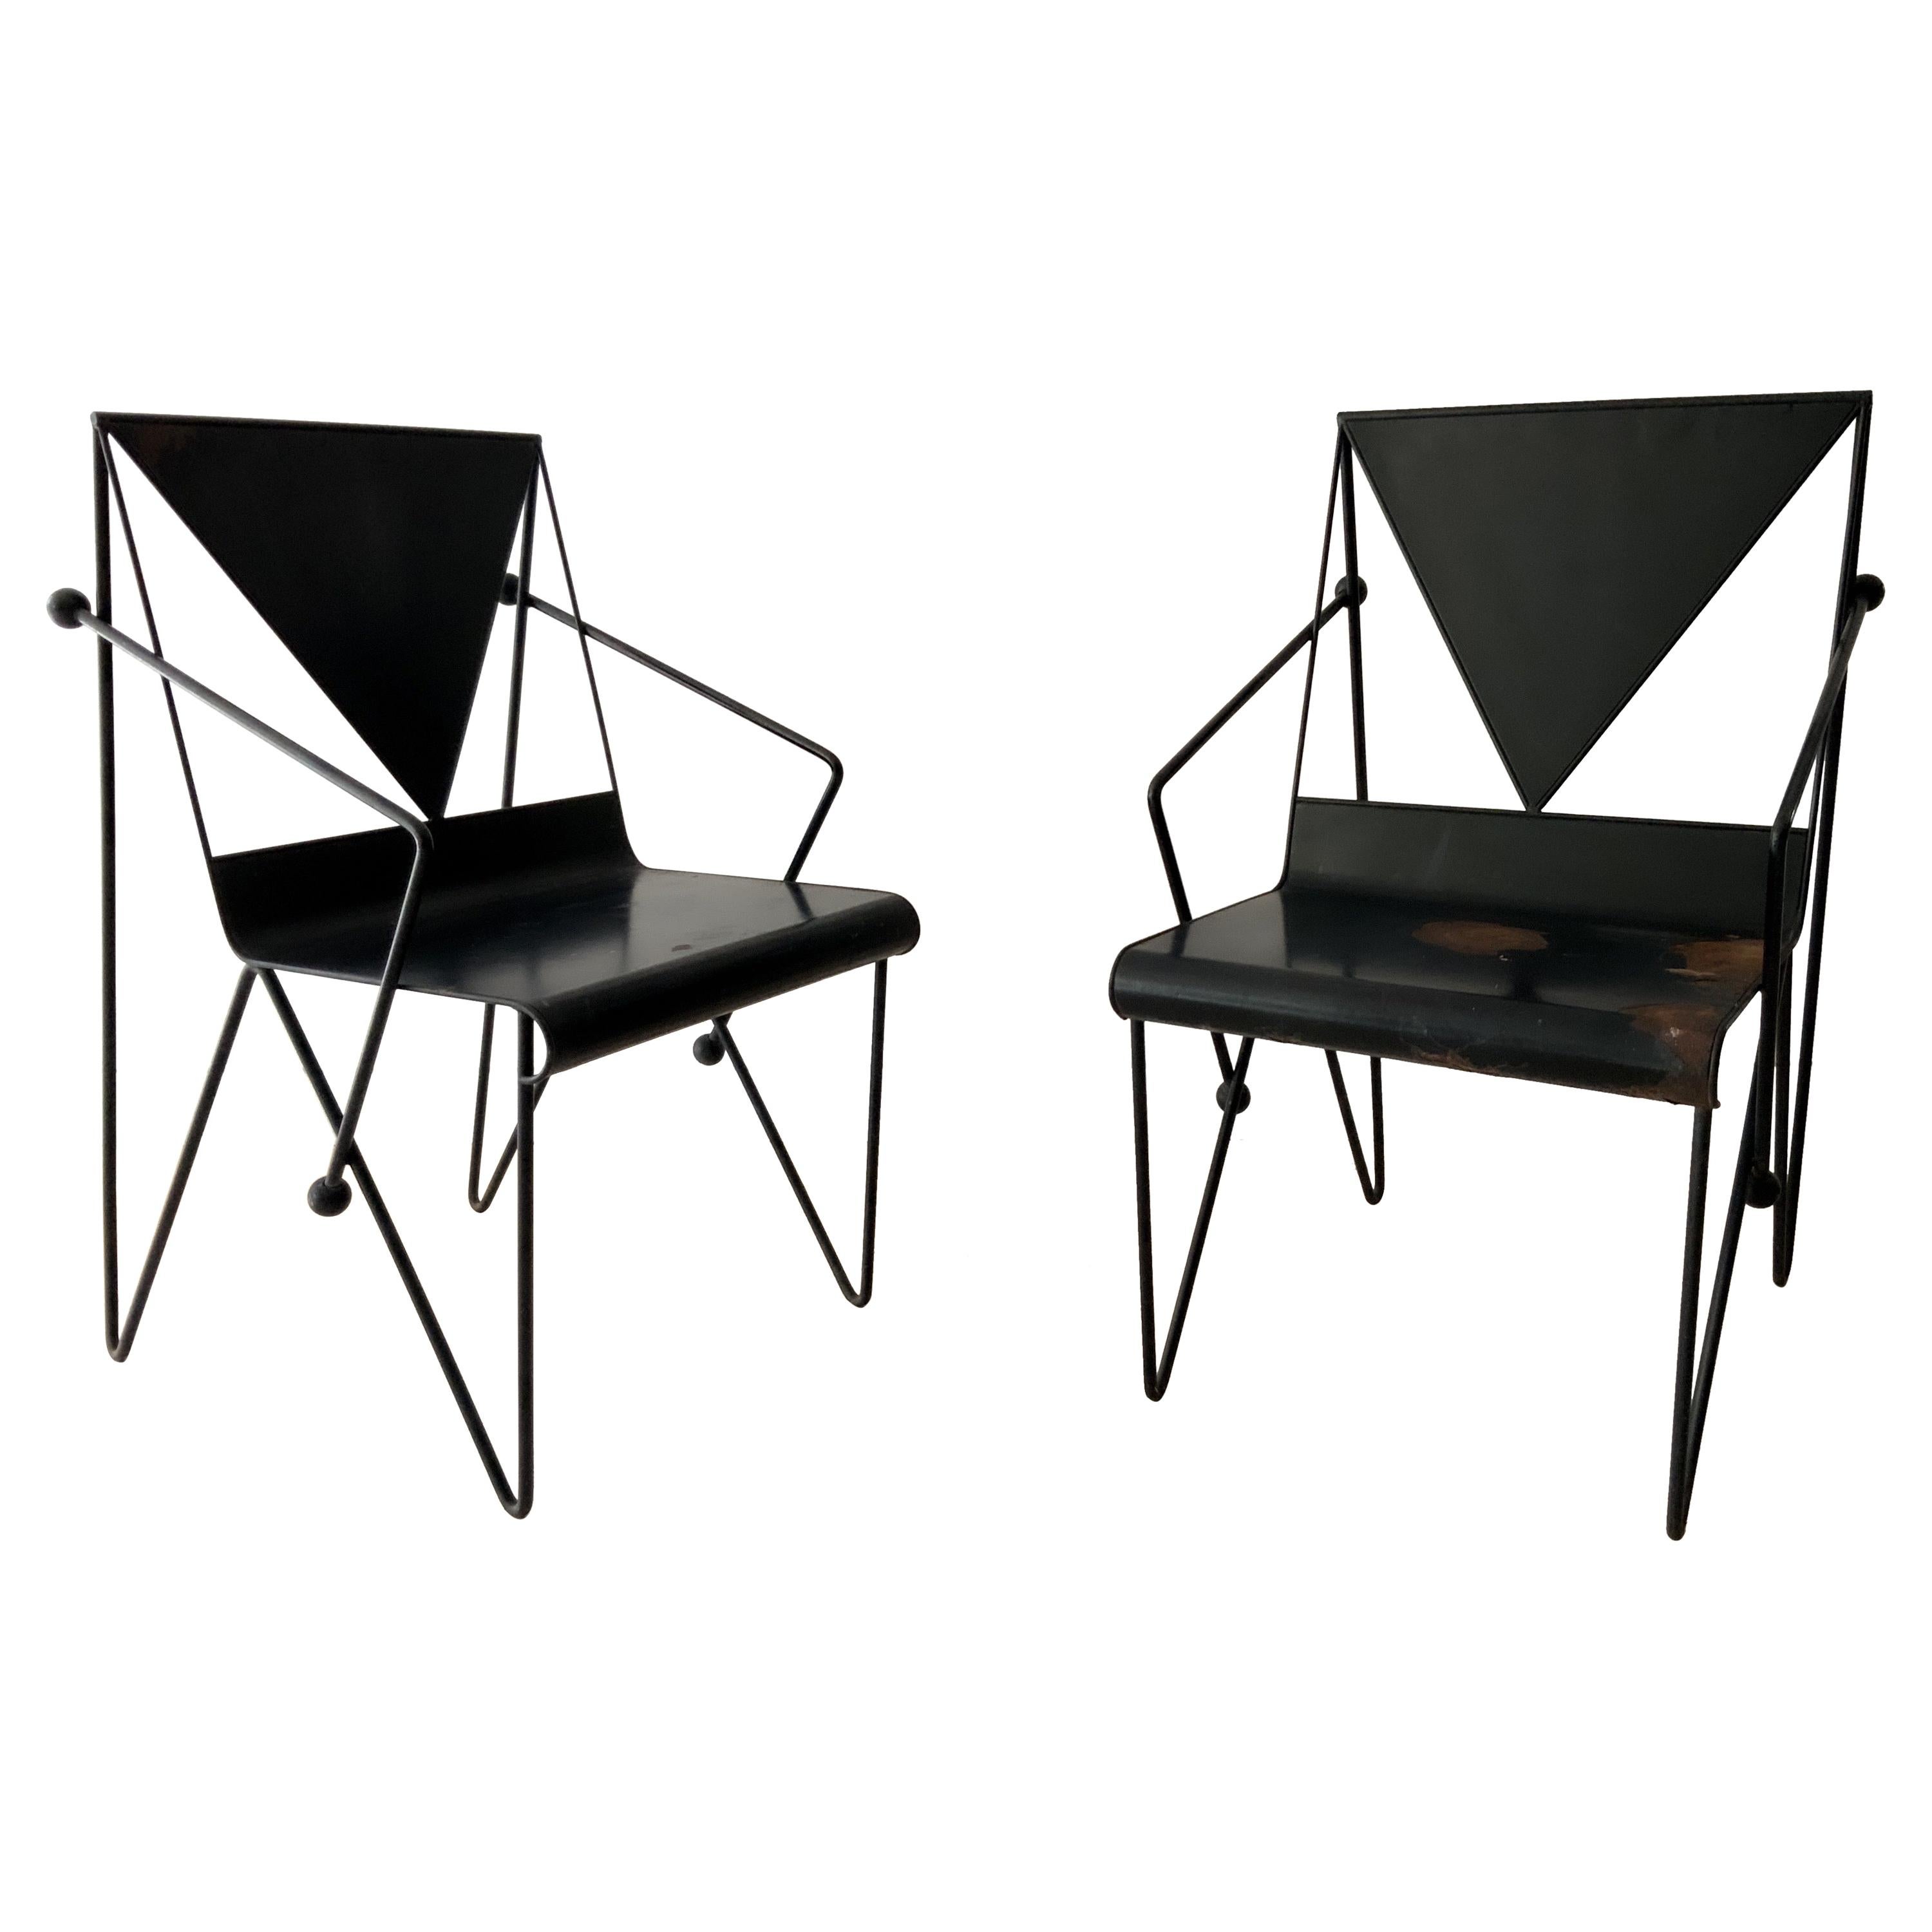 Mexican Modern Iron Chairs For Sale